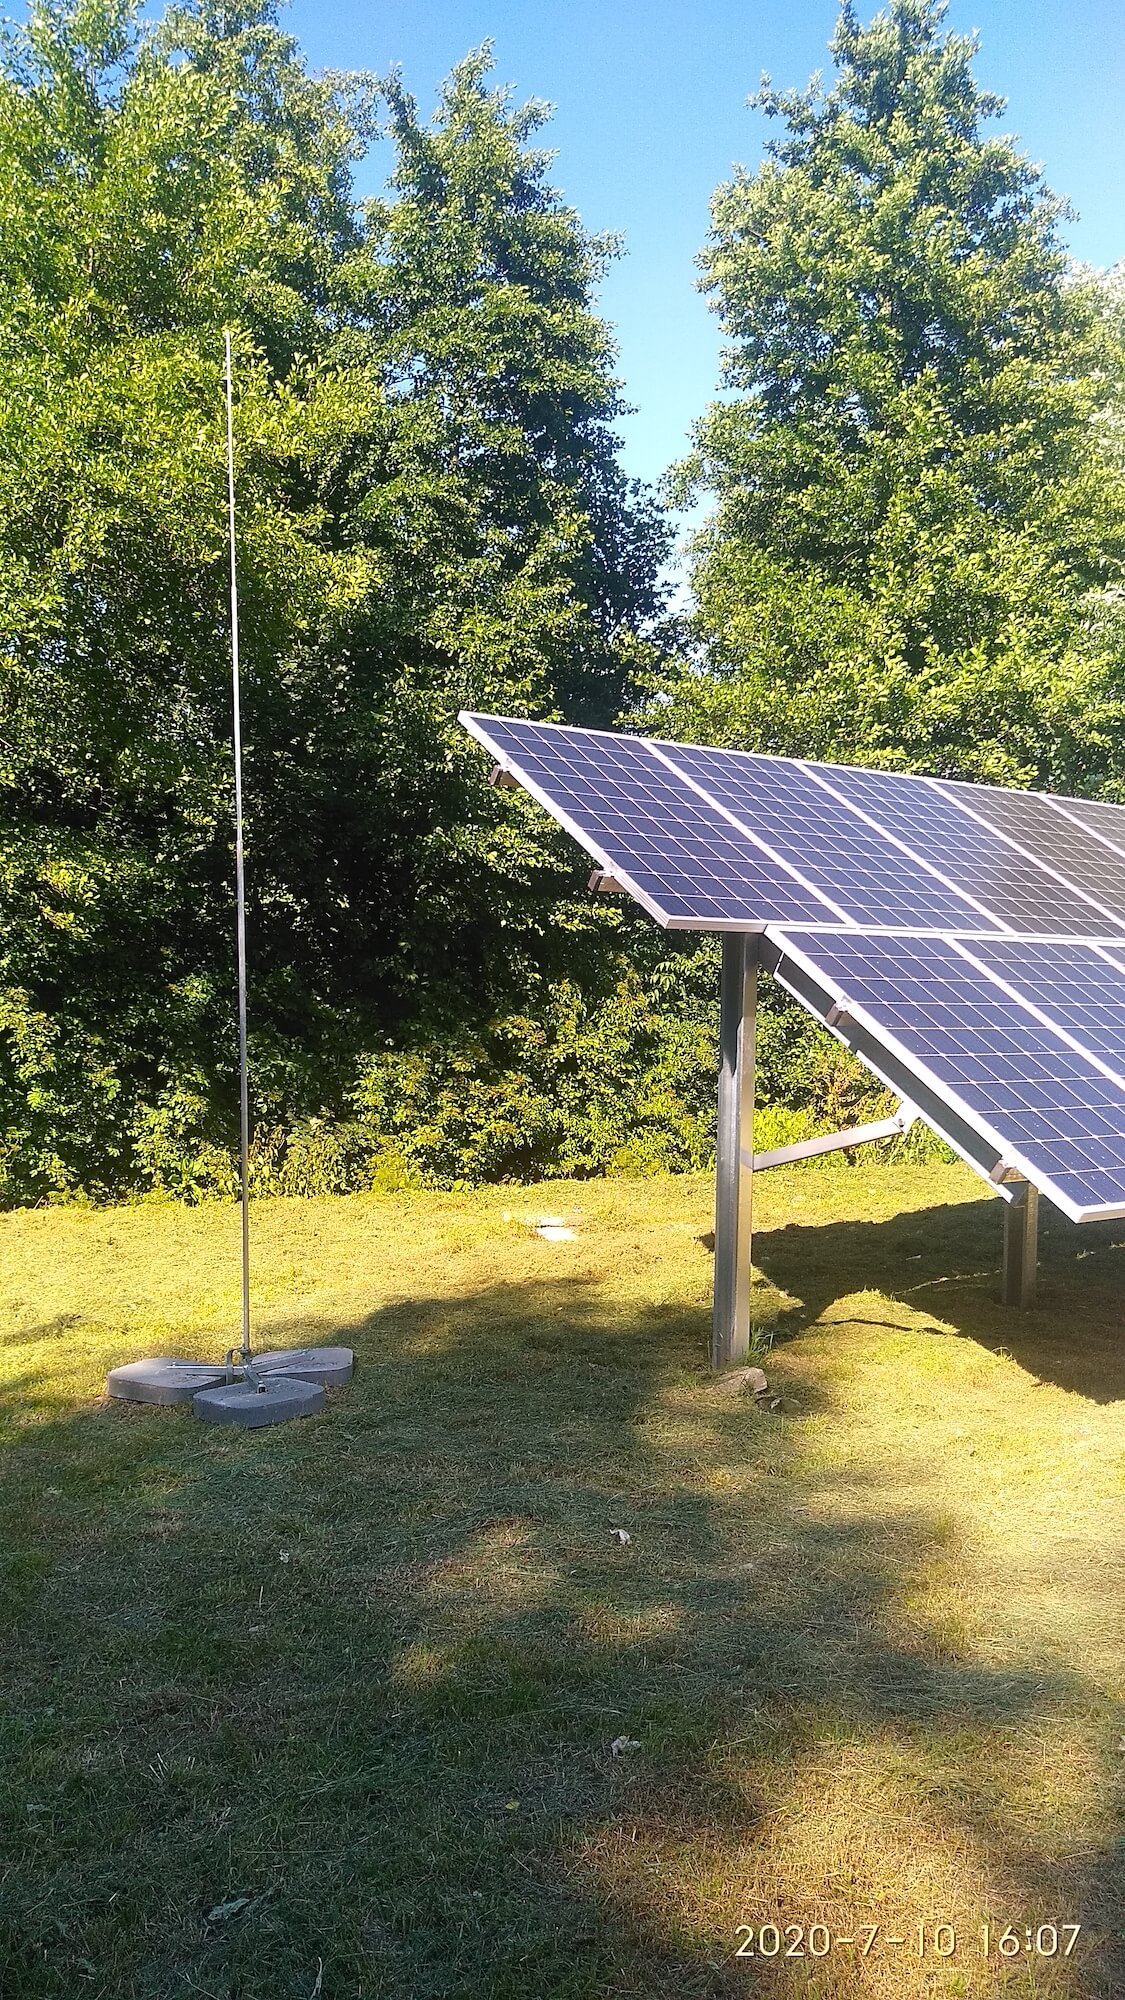 Protection of photovoltaic panels on the ground with lightning masts with concrete weights on a tripod base